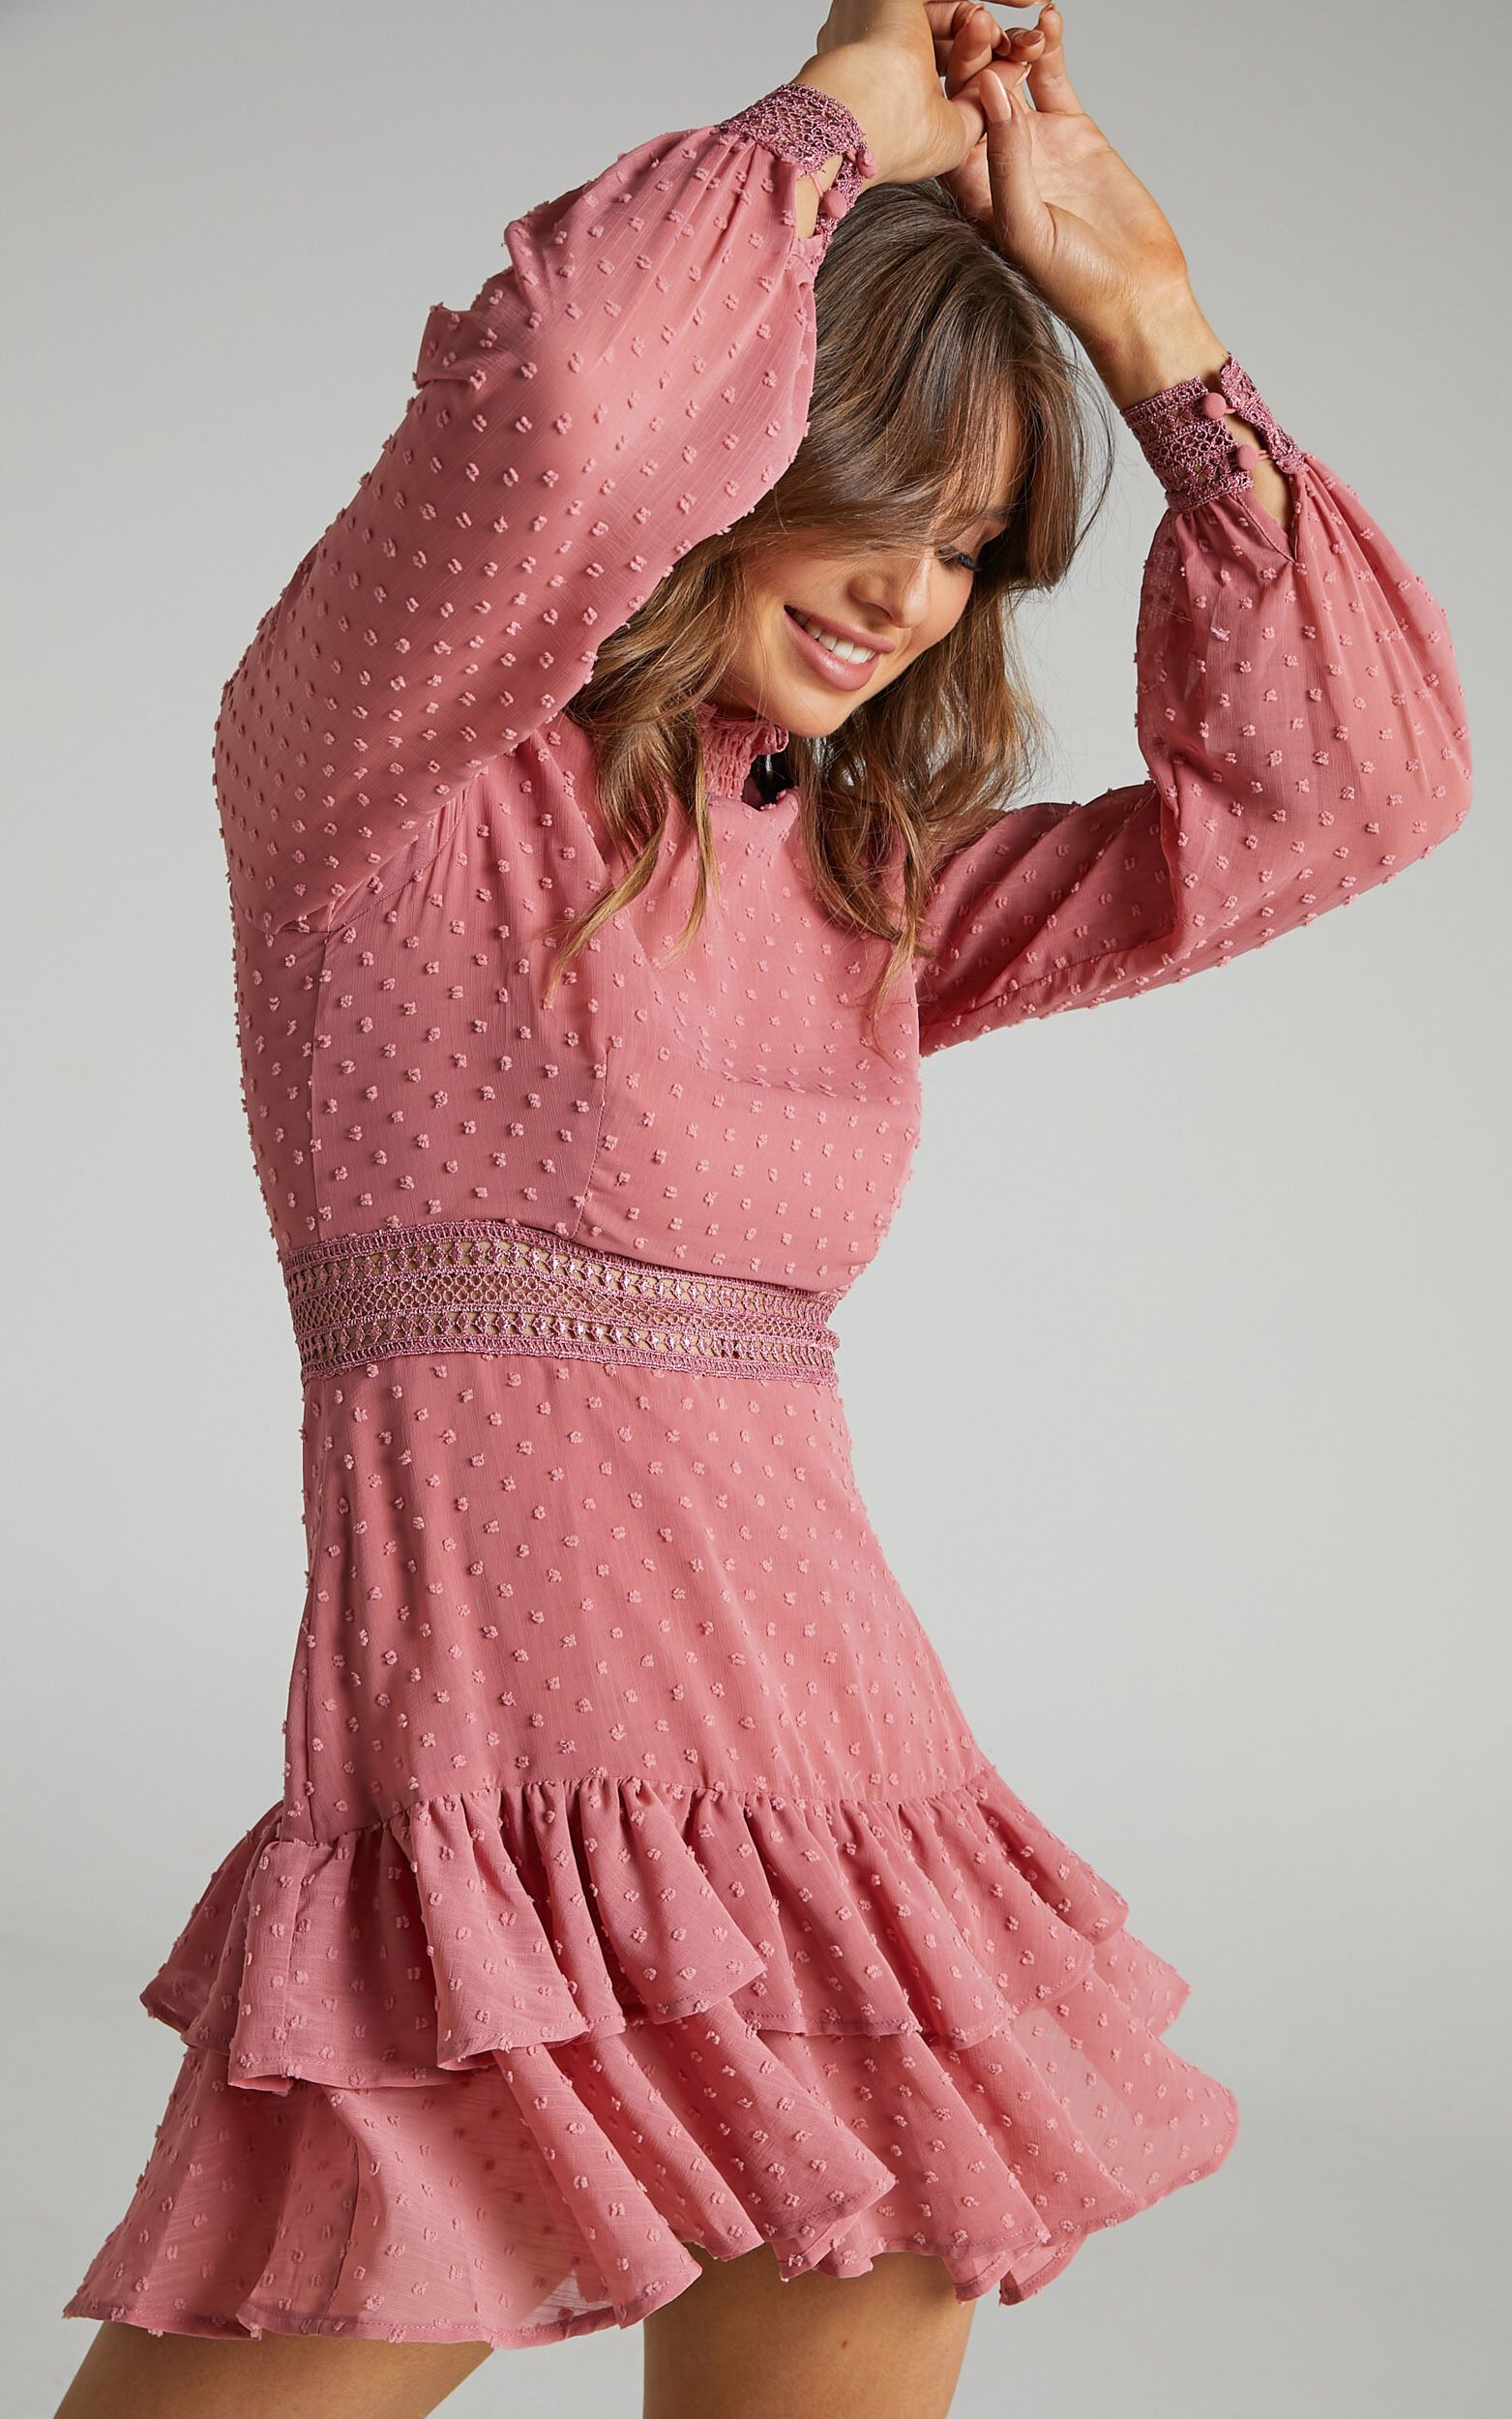 Are You Gonna Kiss Me Long Sleeve Mini Dress in Dusty Rose | Showpo - deactived